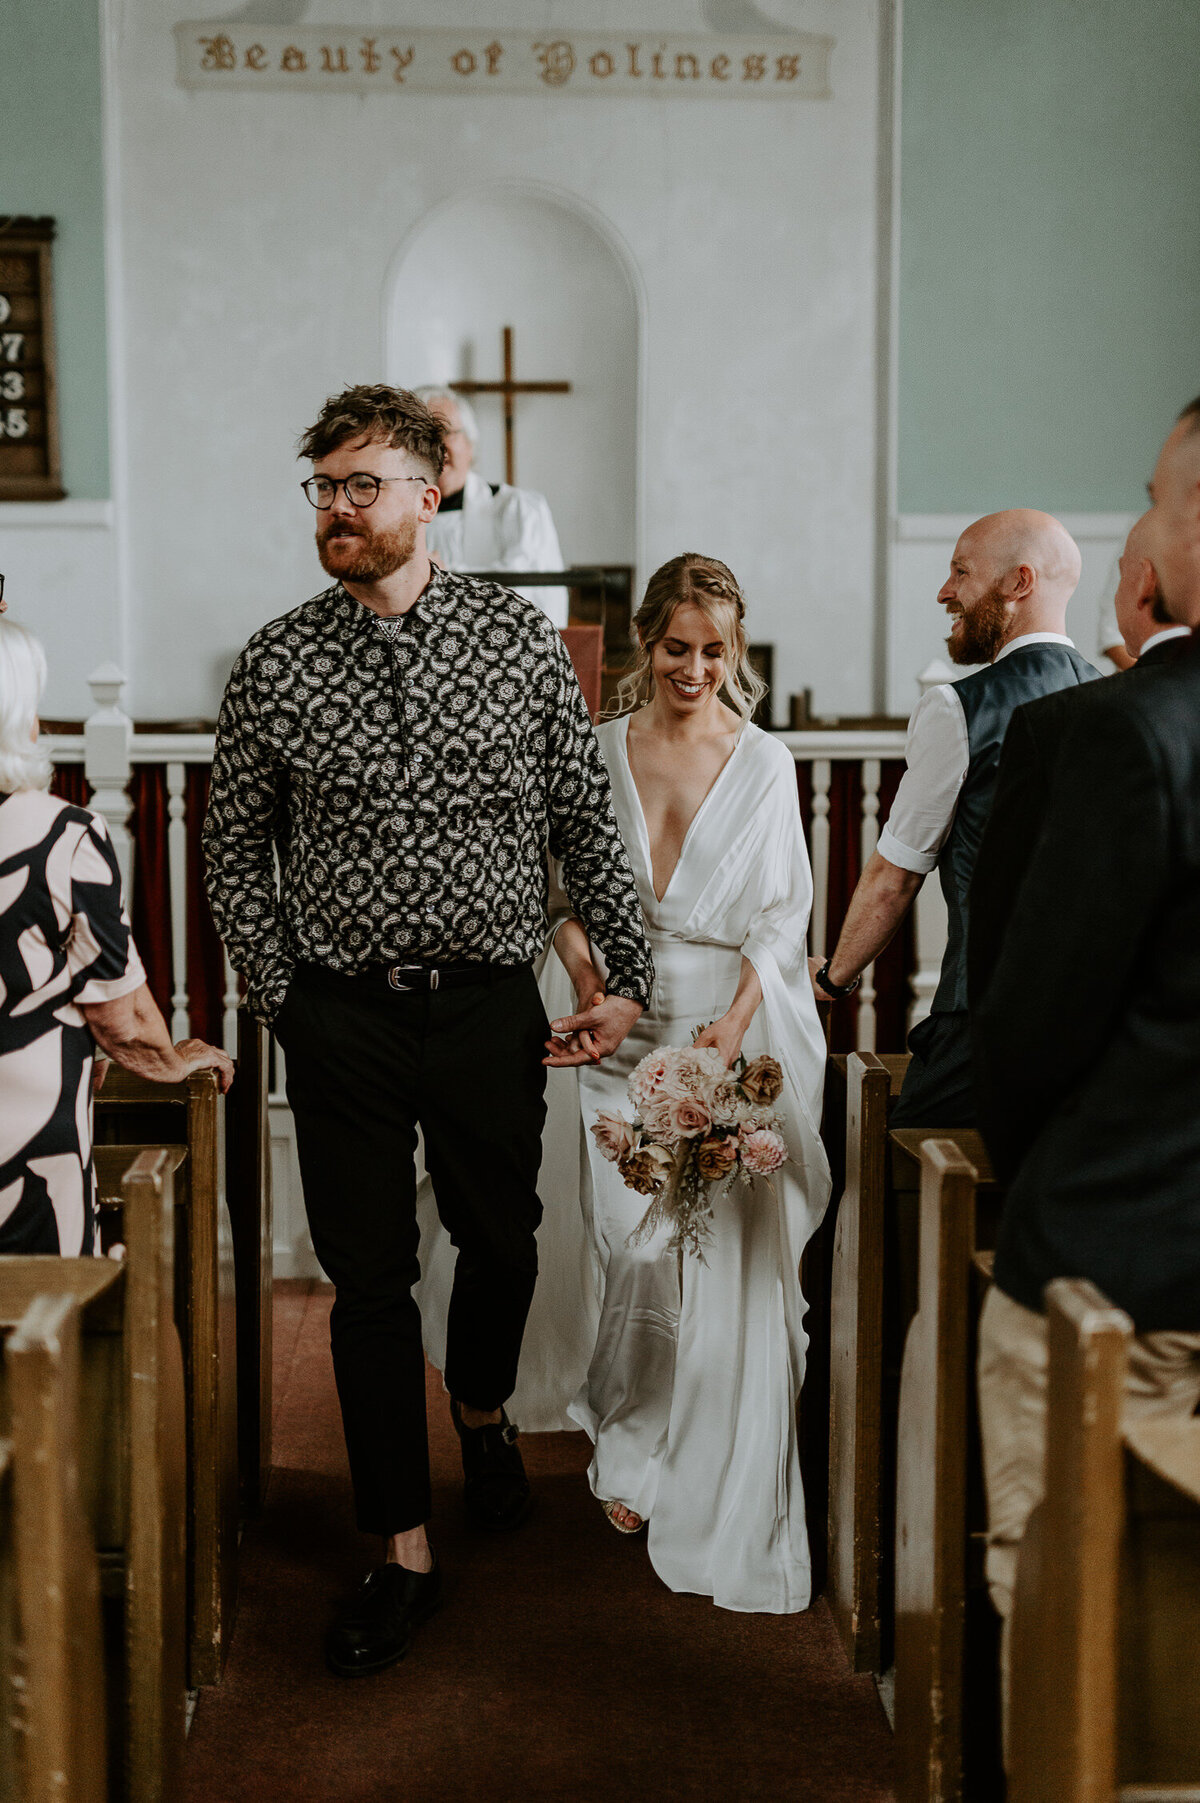 A bride and groom exit their small church wedding in Bristol. The church is small and decaying, it reminds me of a Little White Chapel Las Vegas wedding church. The couples wedding was a boho themed.